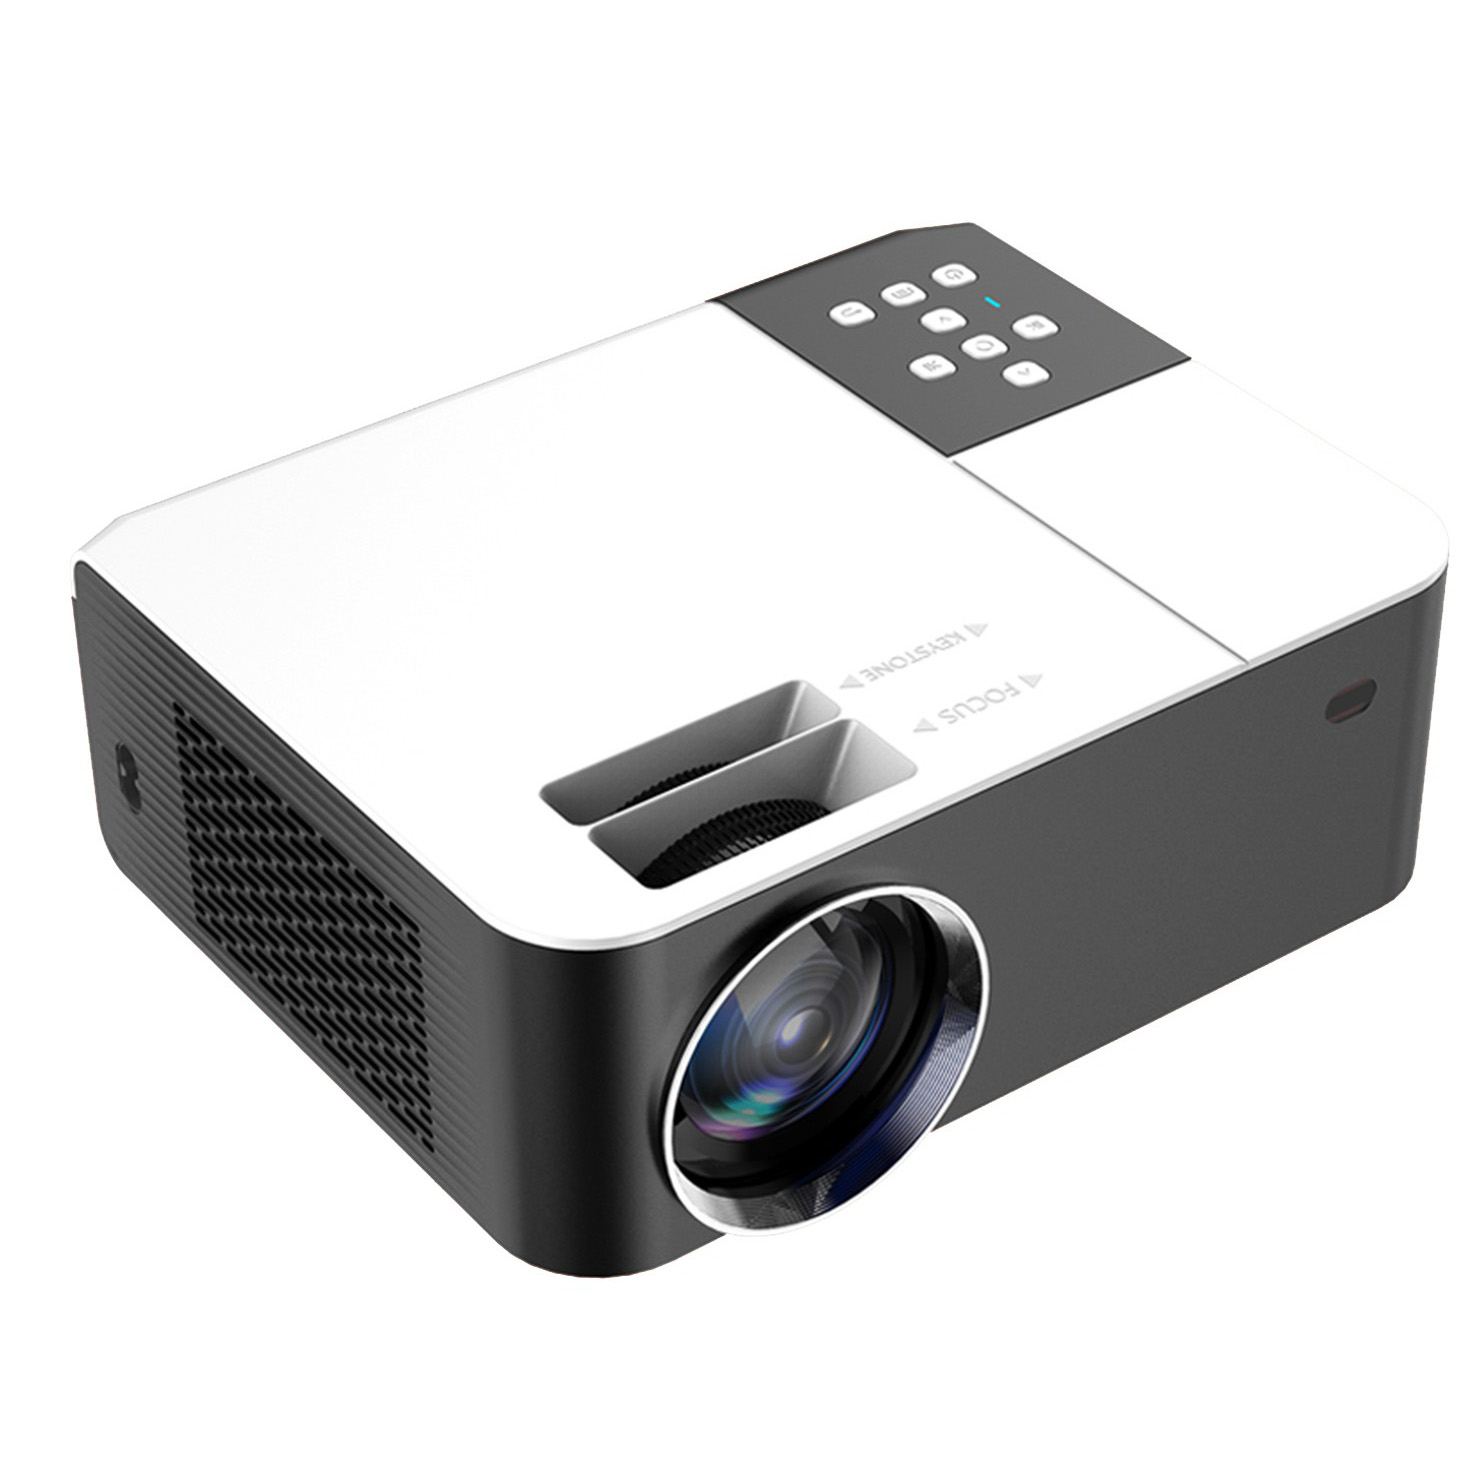 UX-C12 educational high brightness 1080p home theater projector Featured Image